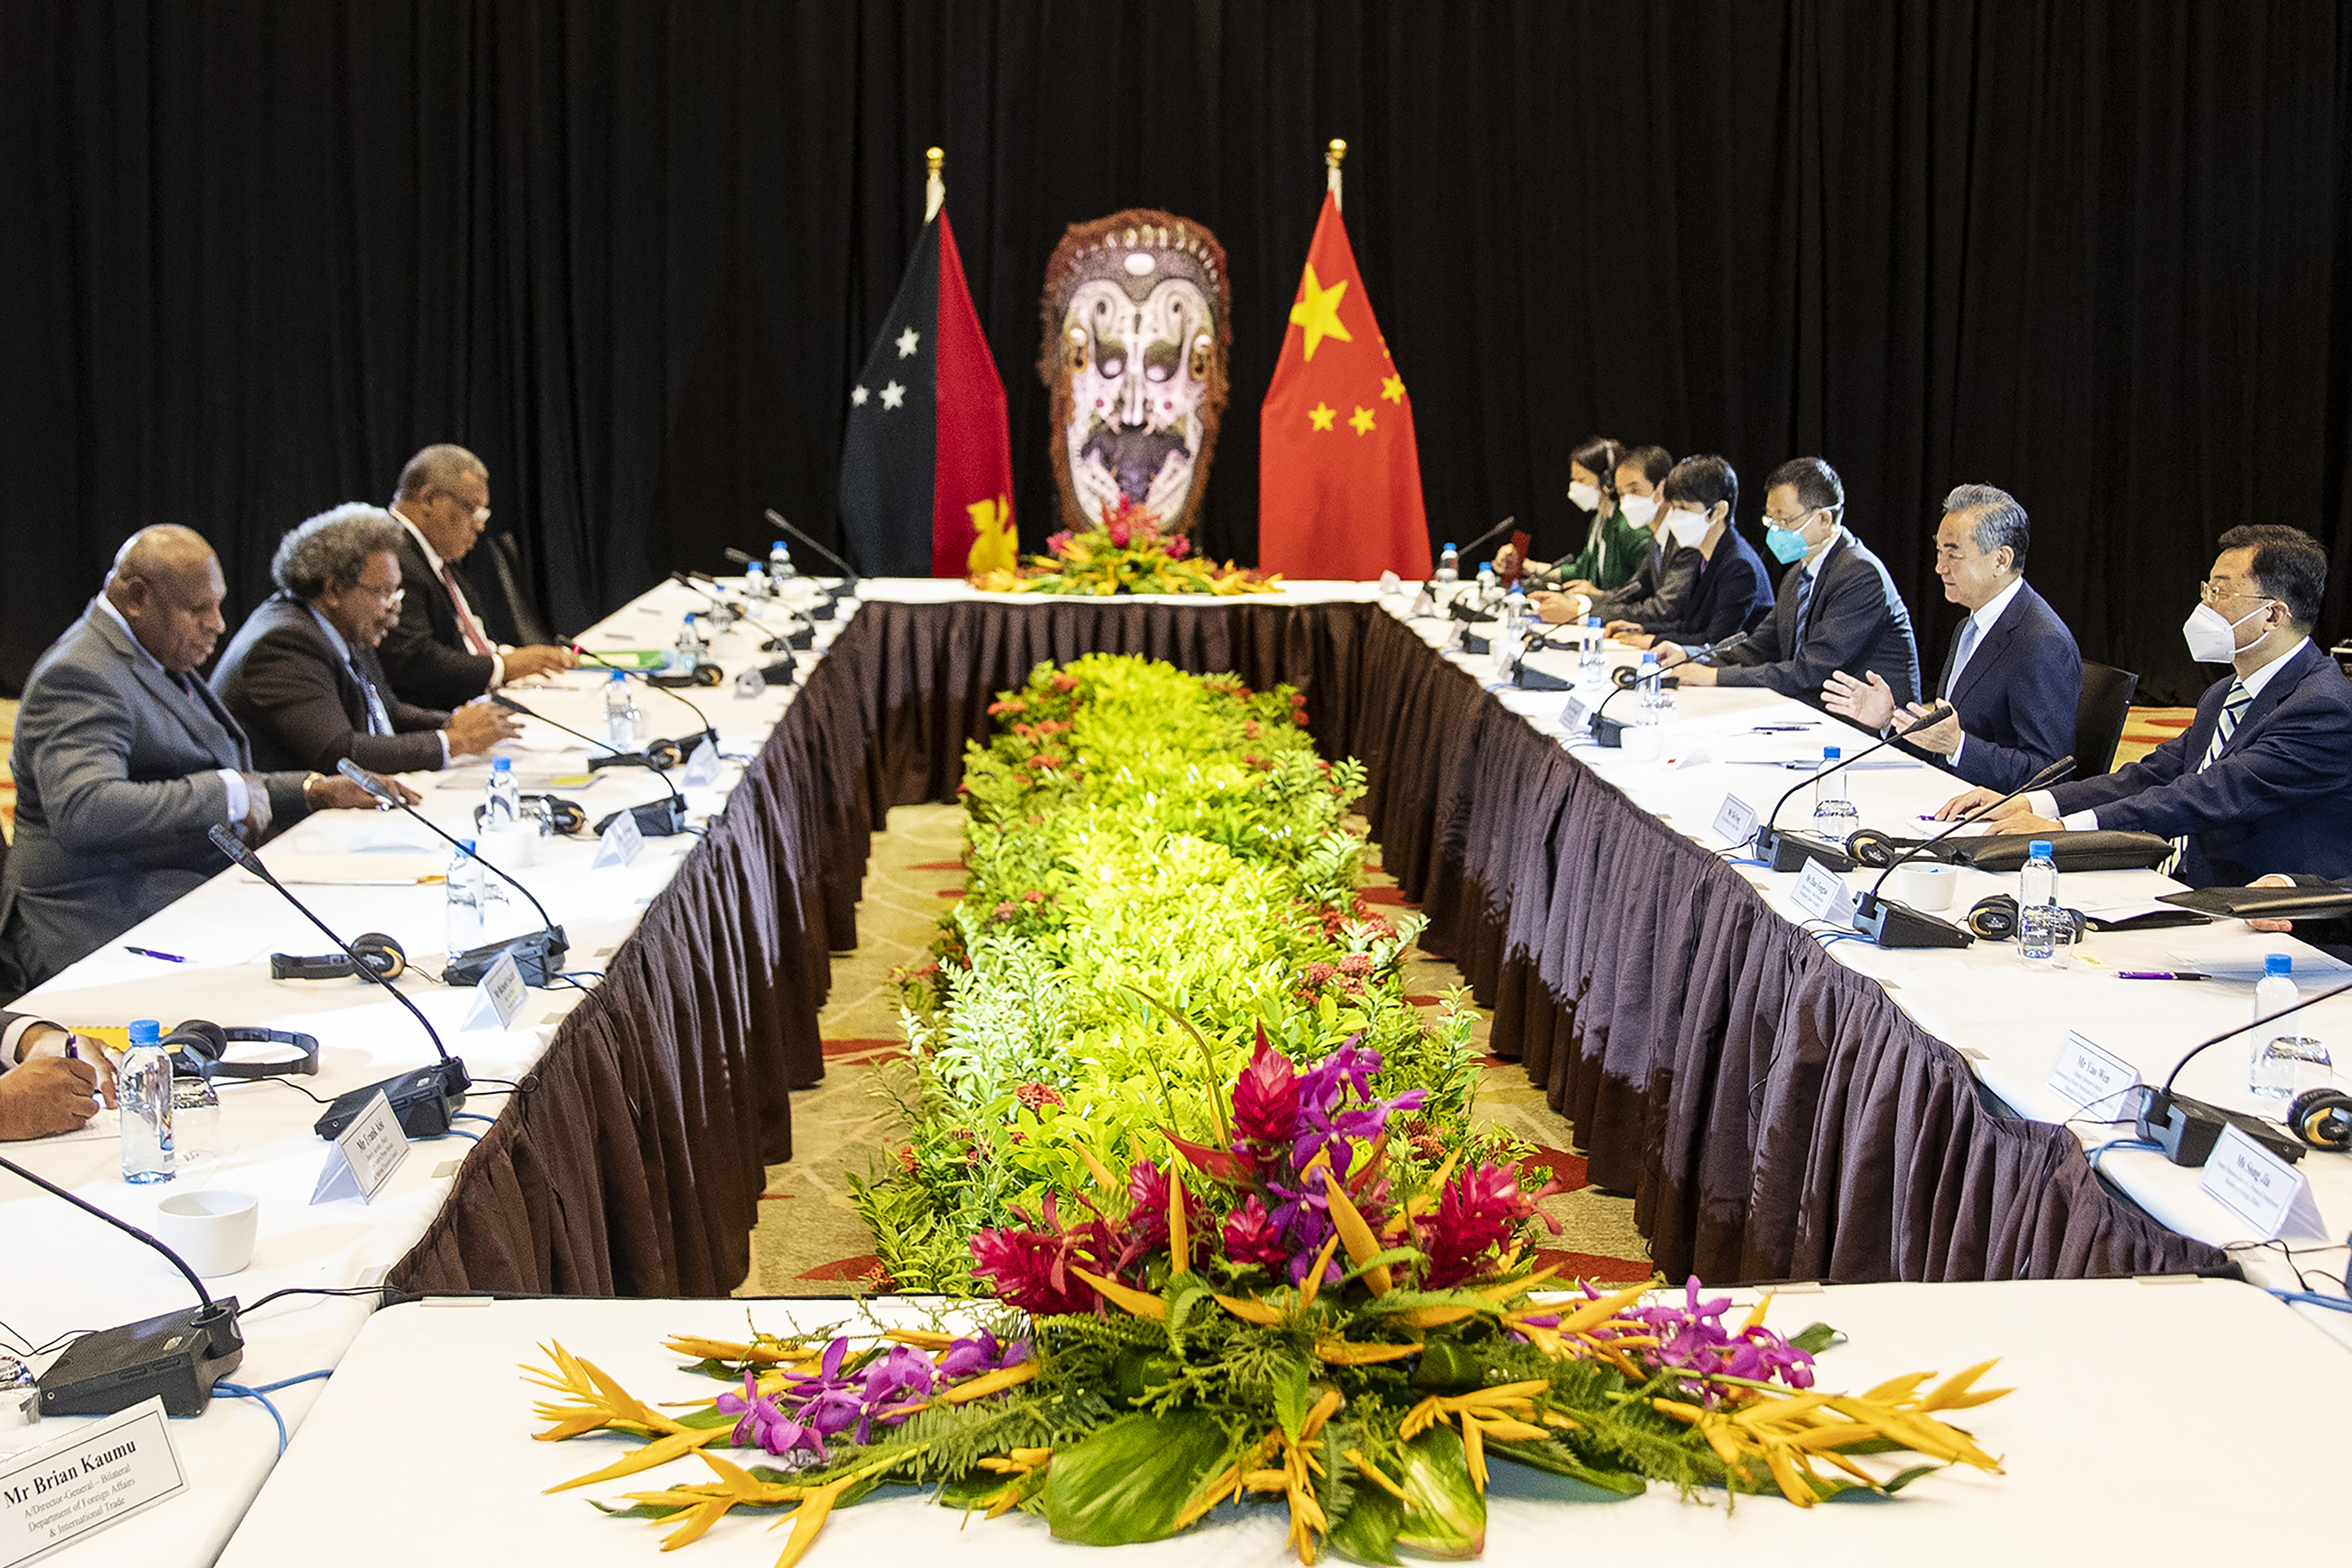 In this photo released by Xinhua News Agency, visiting Chinese Foreign Minister Wang Yi, second from right, holds talks with Minister for Foreign Affairs and International Trade of Papua New Guinea Soroi Eoe, second from left, in Port Moresby, Papua New Guinea, on Friday June 3, 2022. The foreign ministers of Australia and China were both making their final stops Friday, June 3, 2022 on what has become an island-hopping diplomatic duel in the South Pacific. (Bai Xuefei/Xinhua via AP)